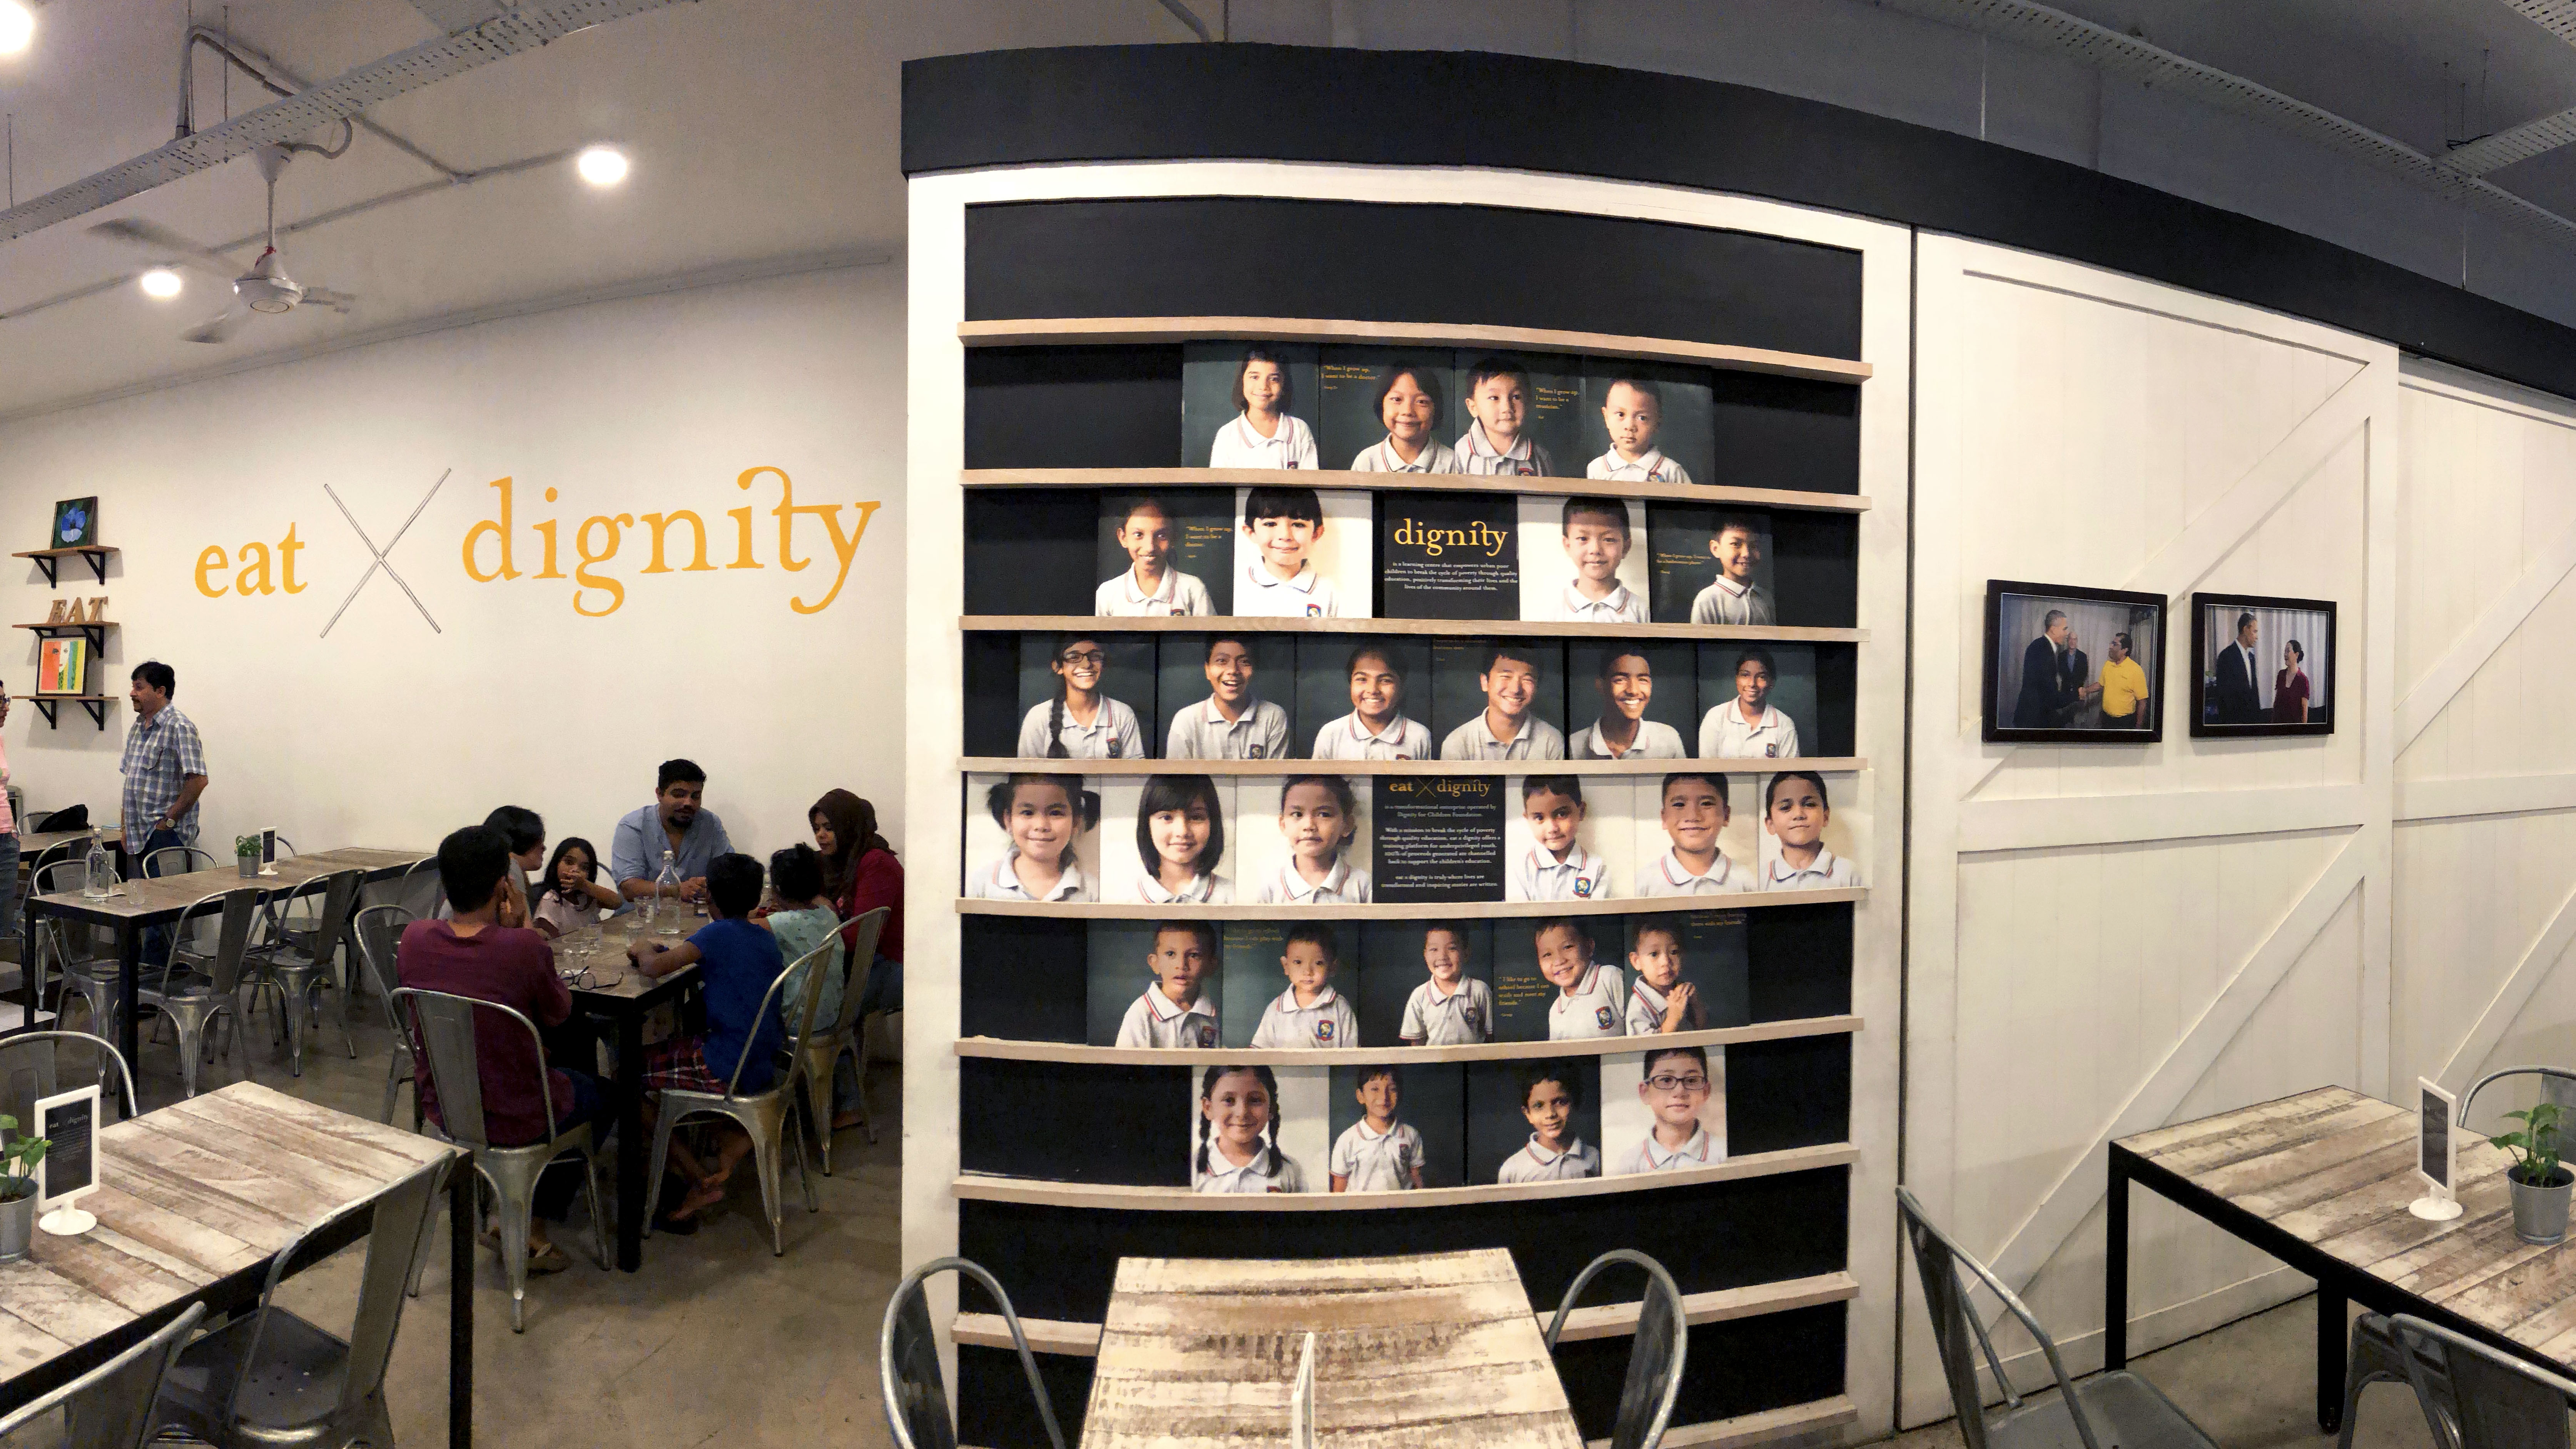 An initiative by the Dignity for Children Foundation, all proceeds from the Eat X Dignity café support the education of underprivileged children. Photo by Victoria Ong